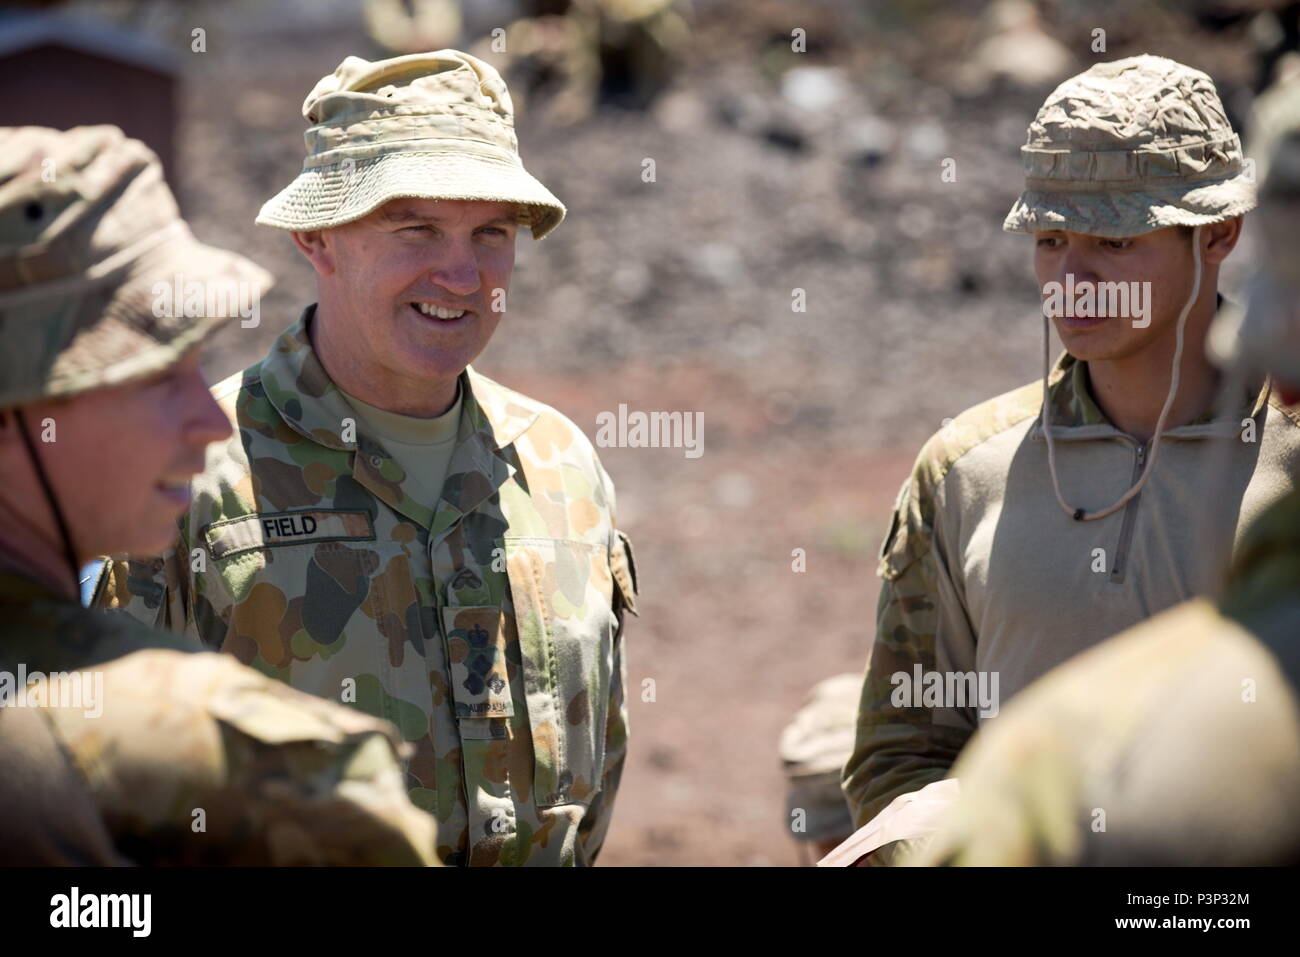 Centralisere indgang region Australian Army officer Brigadier Christopher Field (centre left), CSC,  Commander of 3rd Brigade, talks with Australian Army soldiers from 2nd  Battalion, Royal Australian Regiment, at Pohakuloa training area, Hawaii,  during Exercise Rim